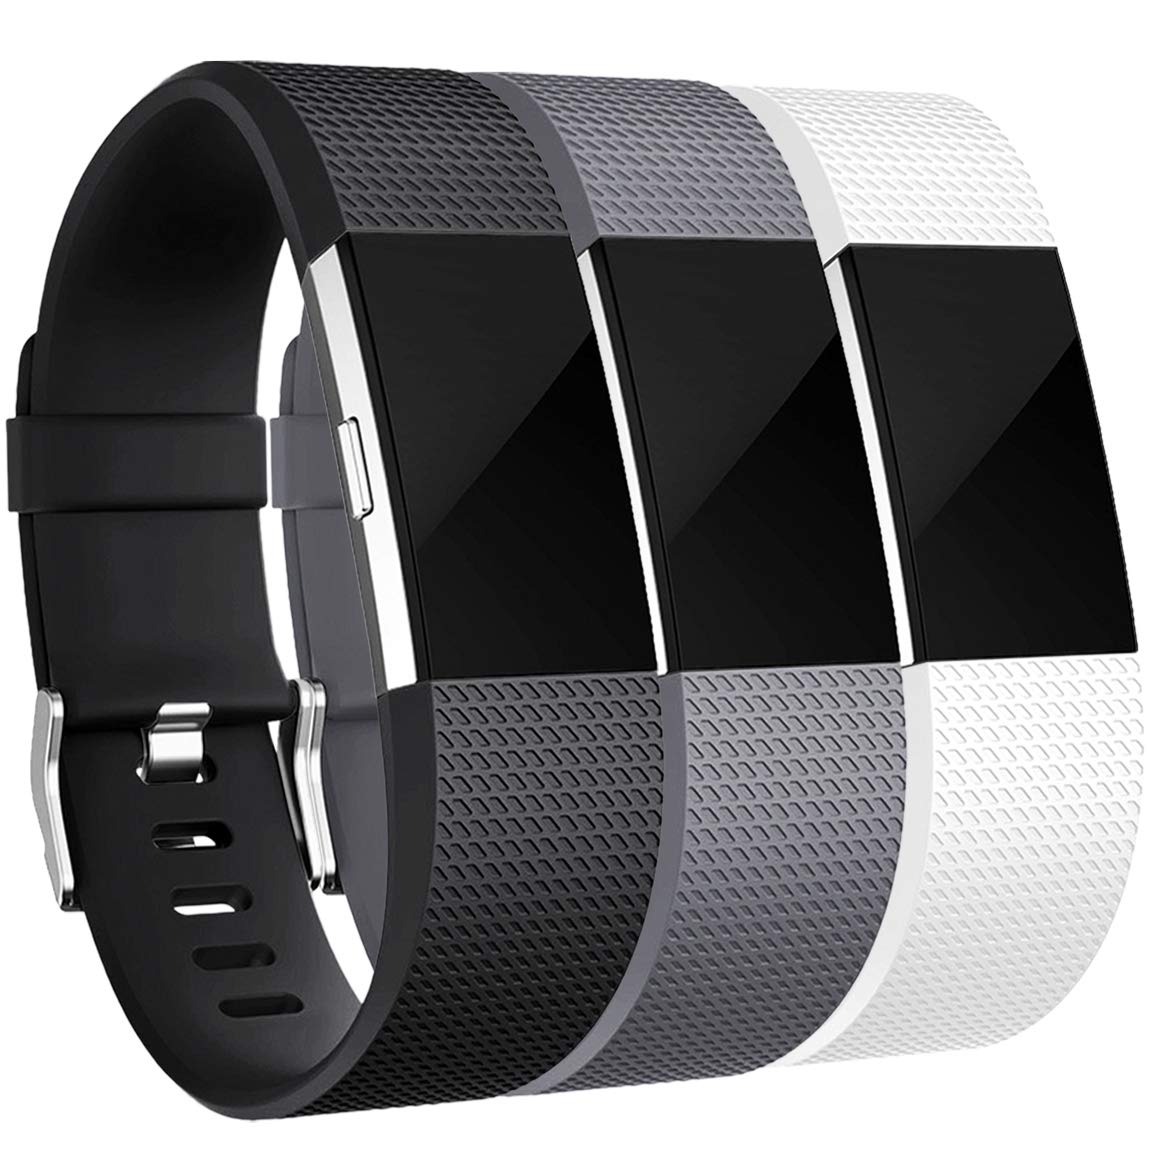 Maledan Bands Replacement Compatible with Fitbit Charge 2, 3-Pack, Small Black/Gray/White